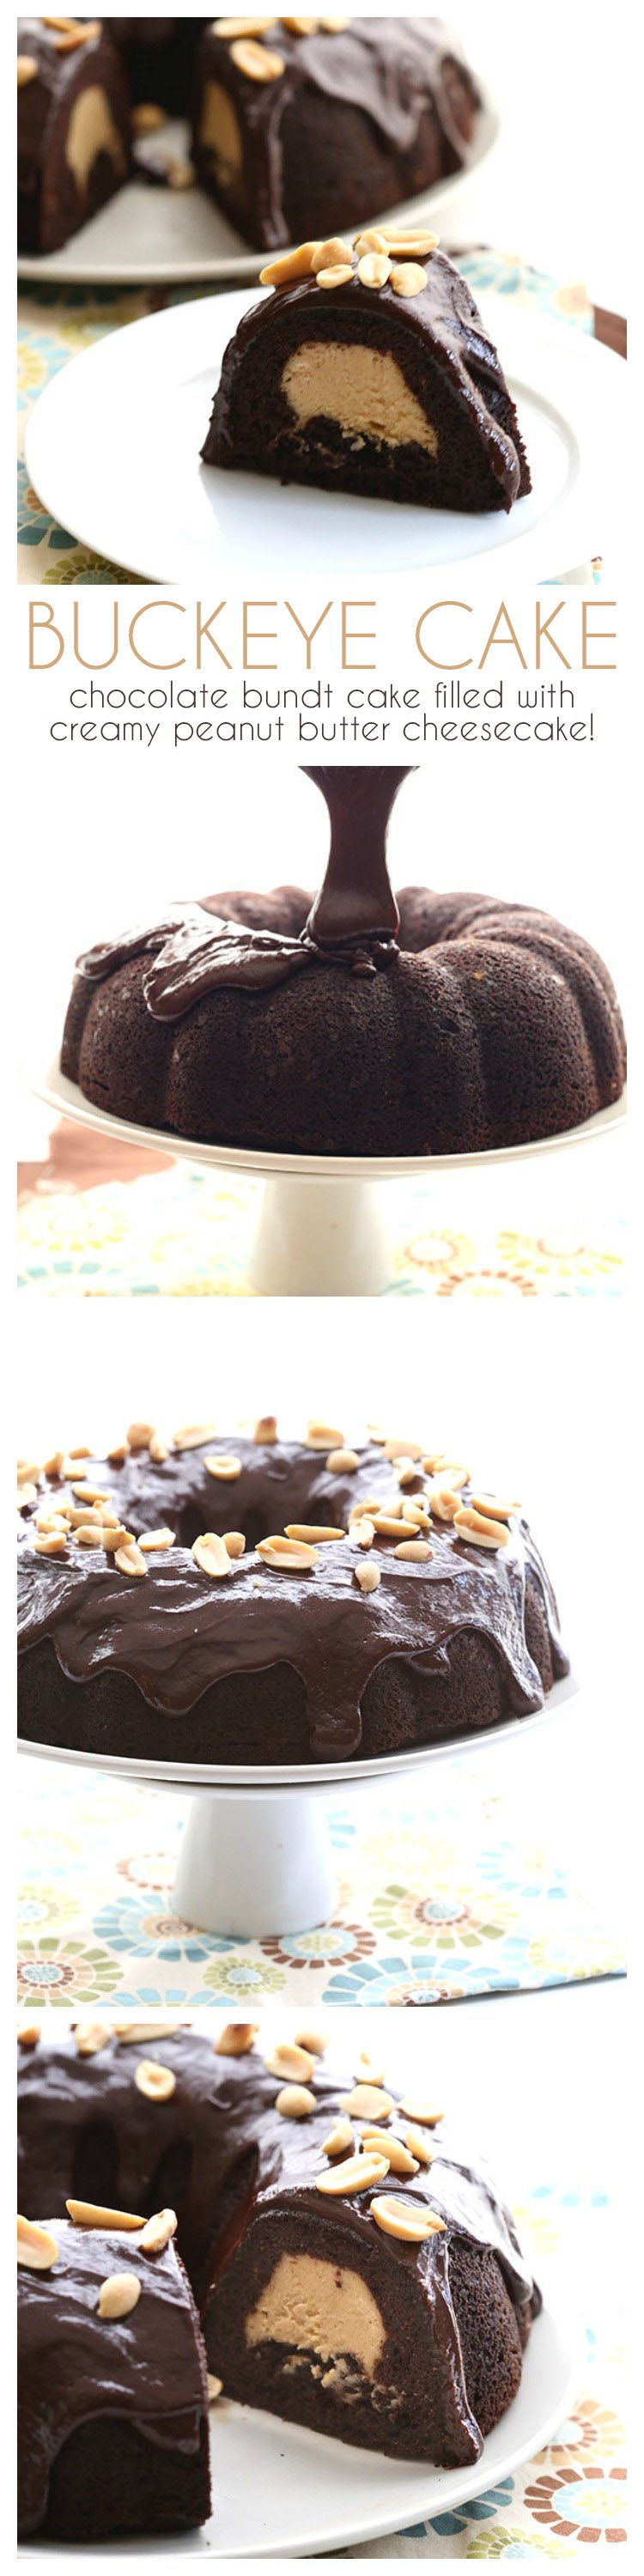 Delicious low carb chocolate bundt cake with a tunnel of creamy peanut butter cheesecake, all topped off with chocolate peanut butter ganache. Your new favorite low carb dessert recipe!